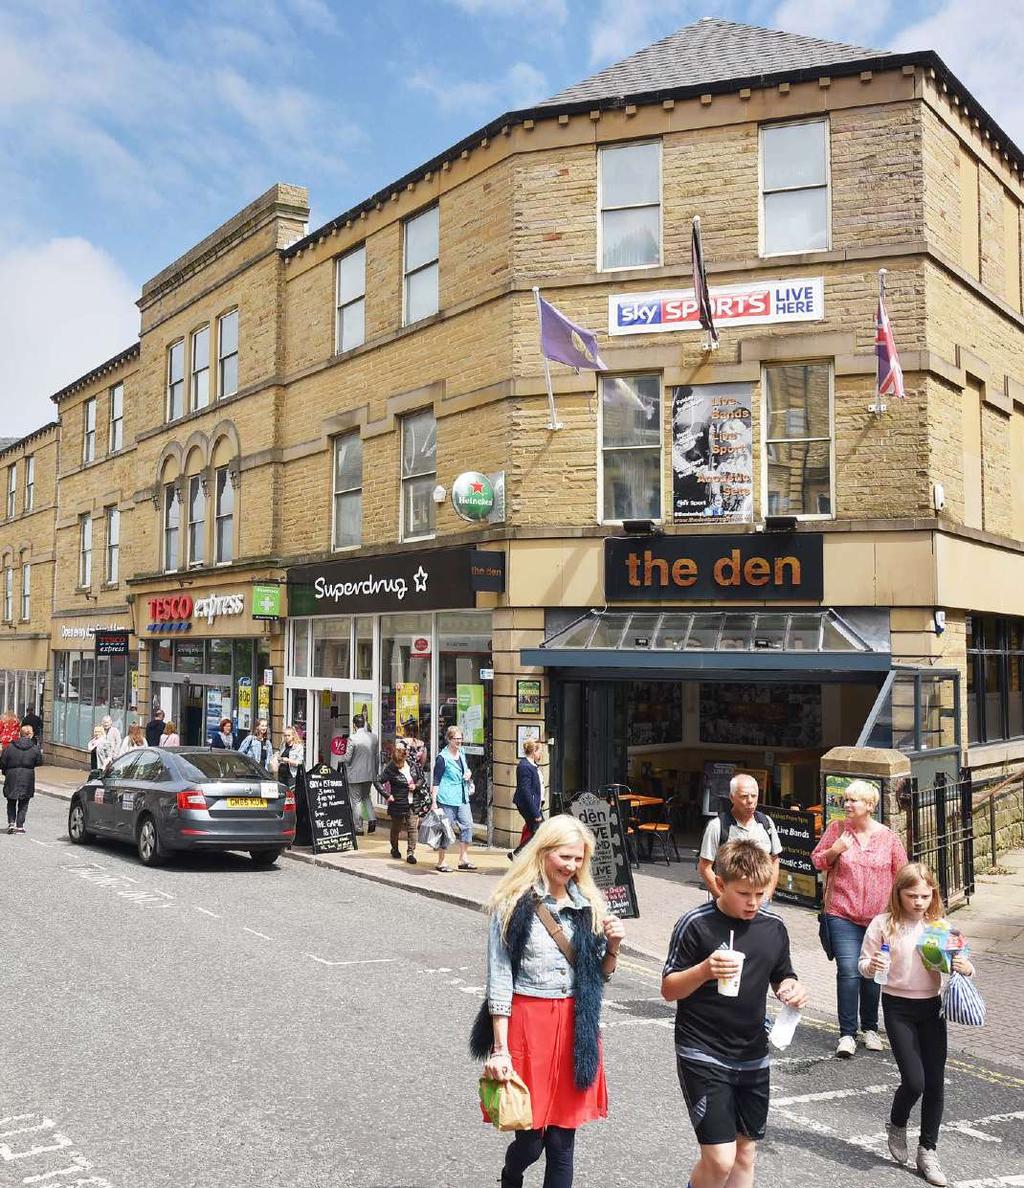 INVESTMENT CONSIDERATIONS Harrogate is an attractive Victorian spa town and one of the most affluent catchments in the UK Prominent multi-let convenience retail investment Strategic location on